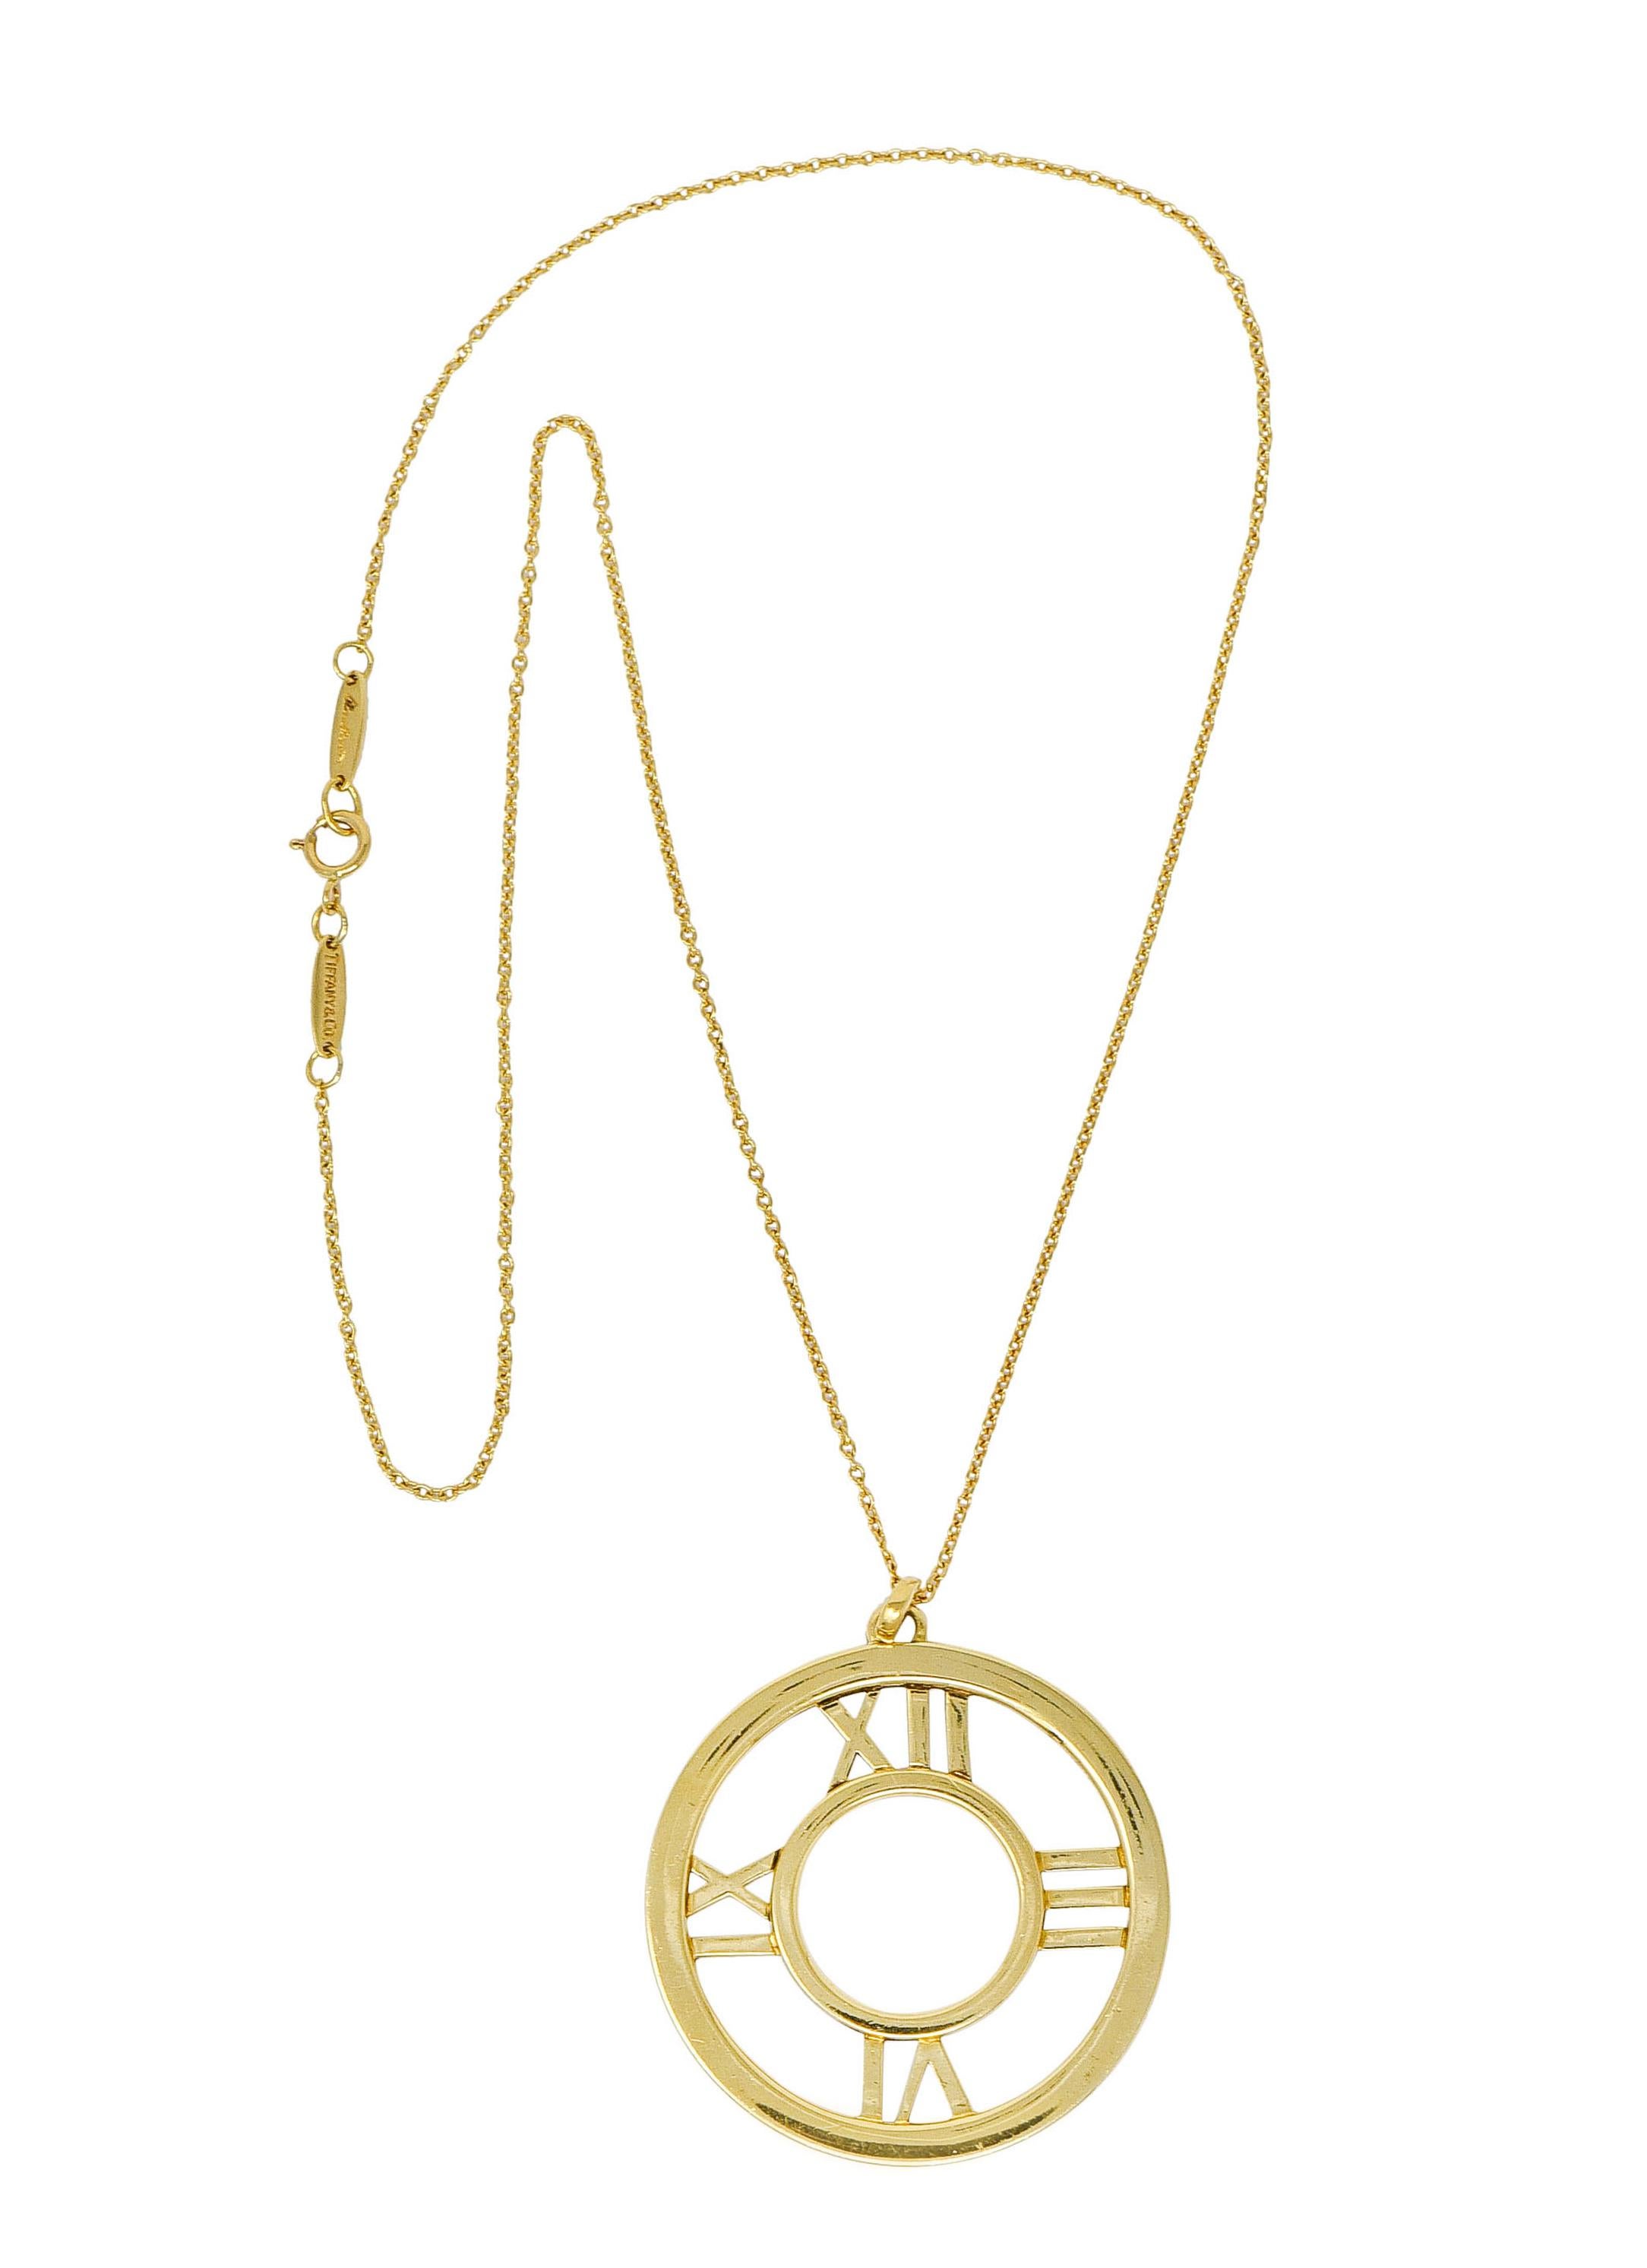 Designed as a pierced pendant with two concentric polished gold circles

Accented by polished gold Roman numerals at each cardinal point

Accompanied by cable chain fully signed Tiffany & Co. Elsa Peretti Spain; completed by spring ring